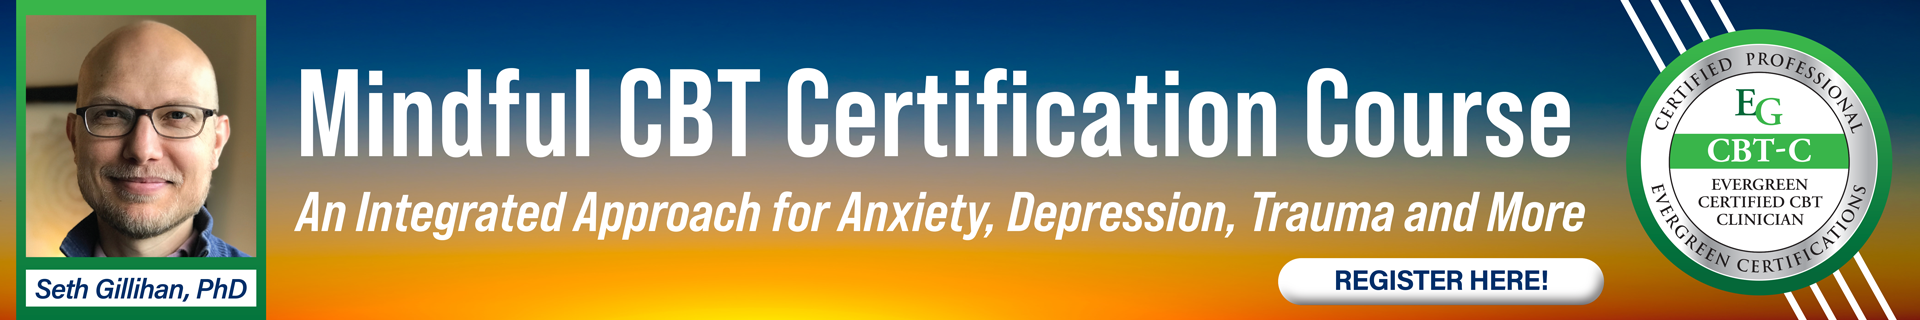 Mindful CBT Certification Course: An Integrated Approach for Treating Anxiety, Depression, Trauma and More